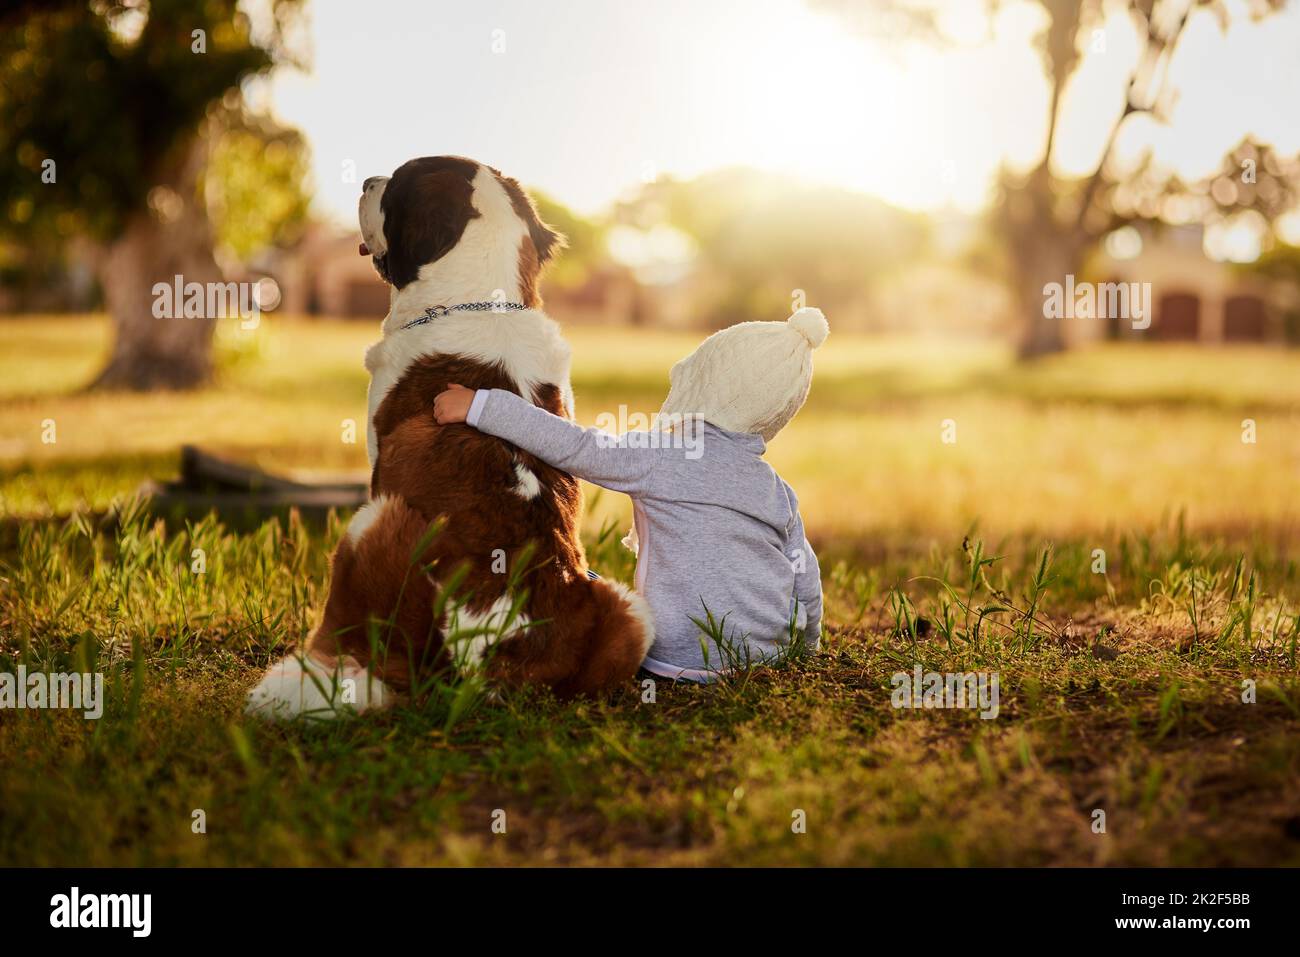 This giant has a gentle heart. Rearview shot of a cute little boy hugging his dog while they sit outside. Stock Photo